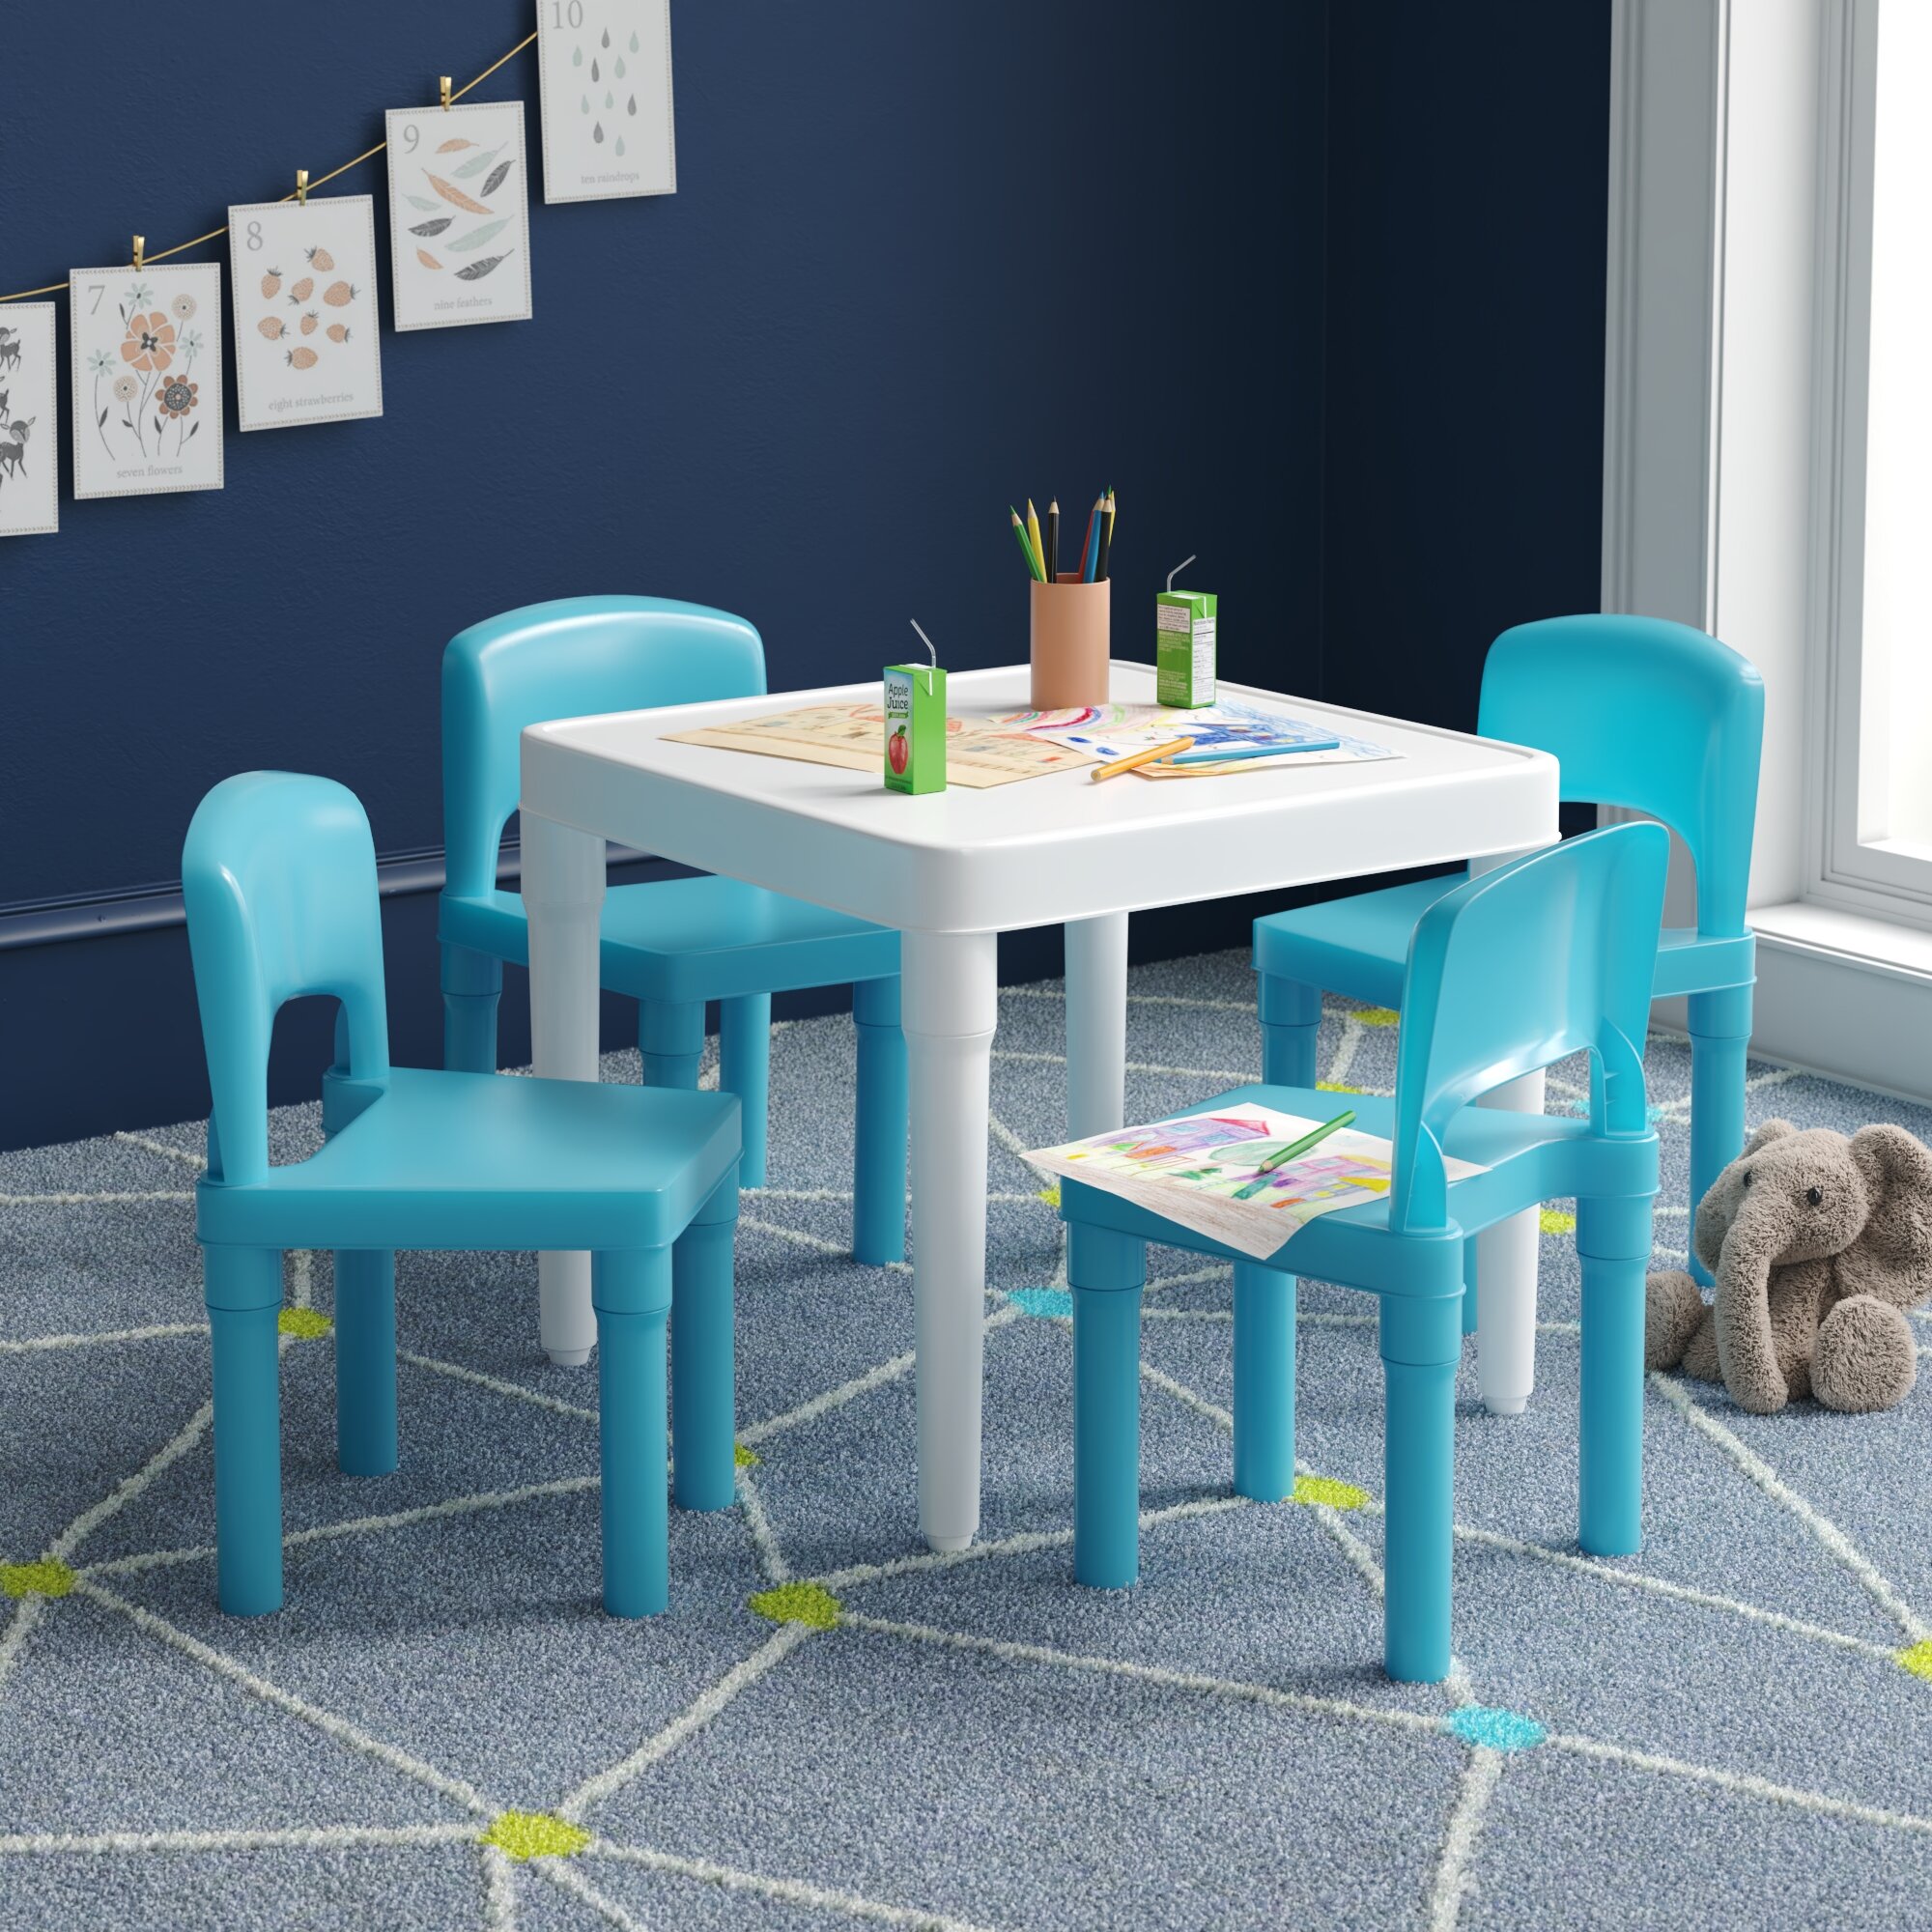 Details about   Household Kids Table Desk 2 Chairs Set SET FOR BOYS OR GIRLS Toddler Plastic US